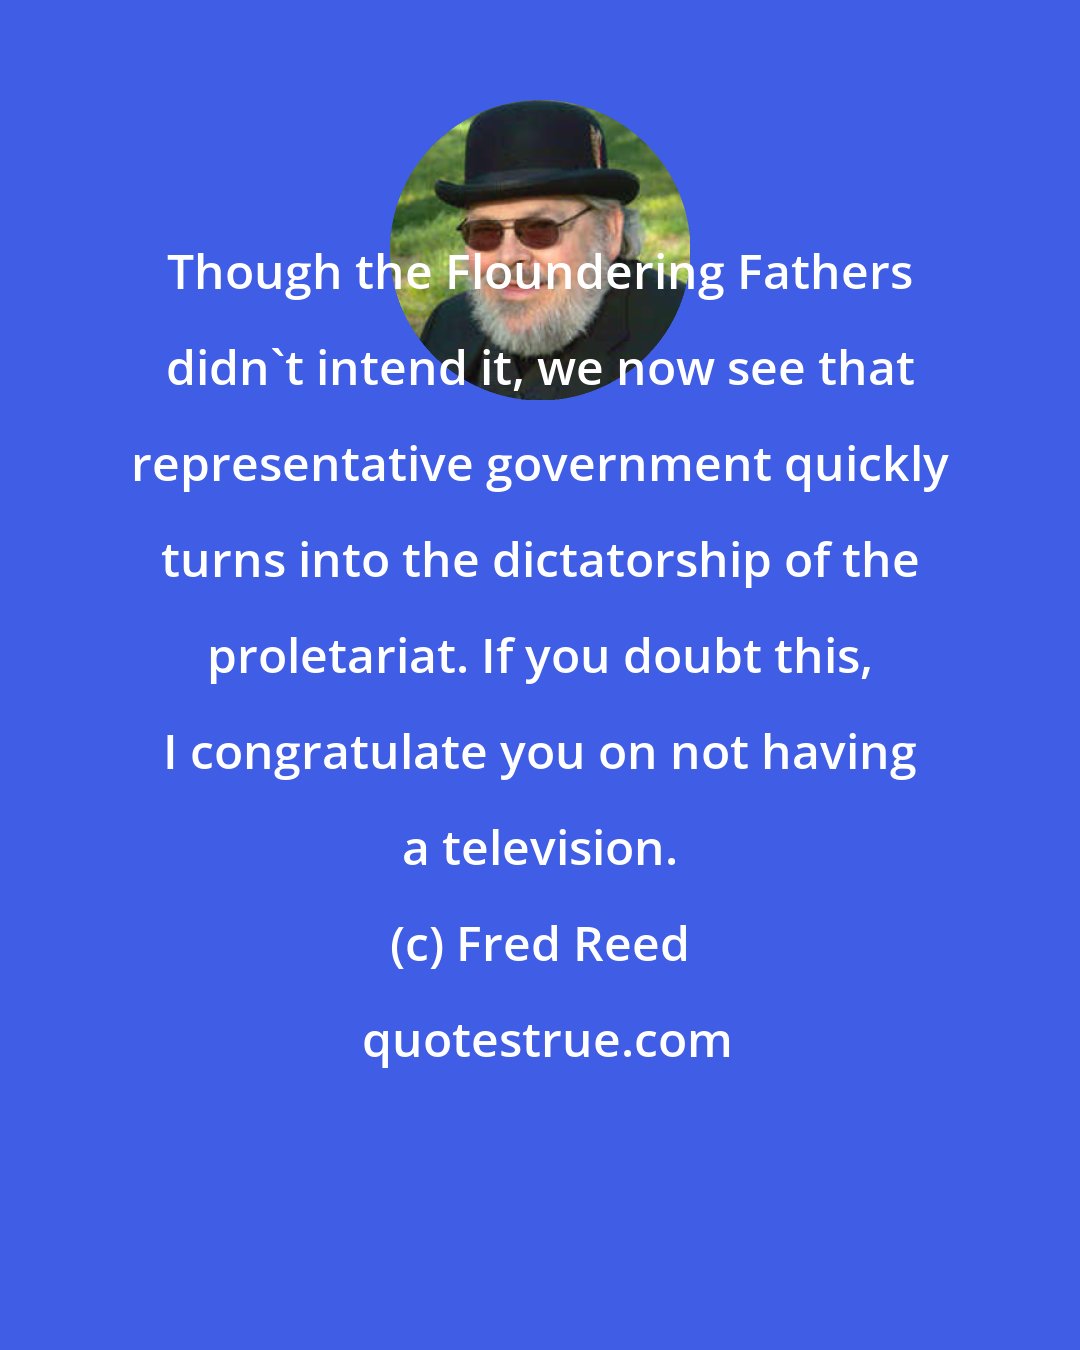 Fred Reed: Though the Floundering Fathers didn't intend it, we now see that representative government quickly turns into the dictatorship of the proletariat. If you doubt this, I congratulate you on not having a television.